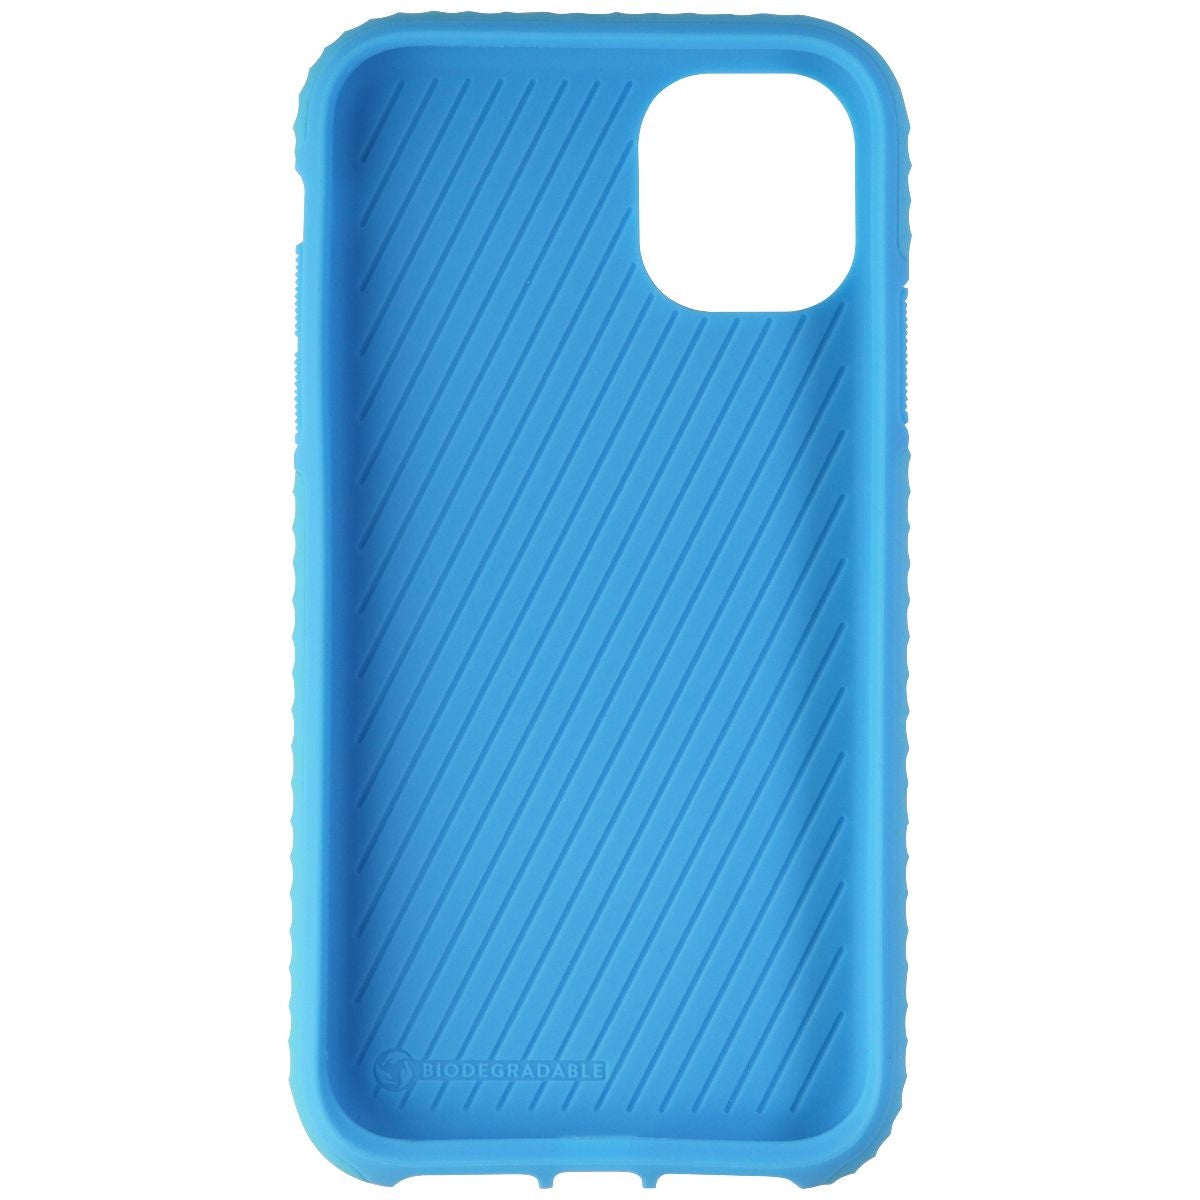 Lander Vise Series Hard Dual Layer Case for Apple iPhone 11 - Blue Cell Phone - Cases, Covers & Skins Lander    - Simple Cell Bulk Wholesale Pricing - USA Seller